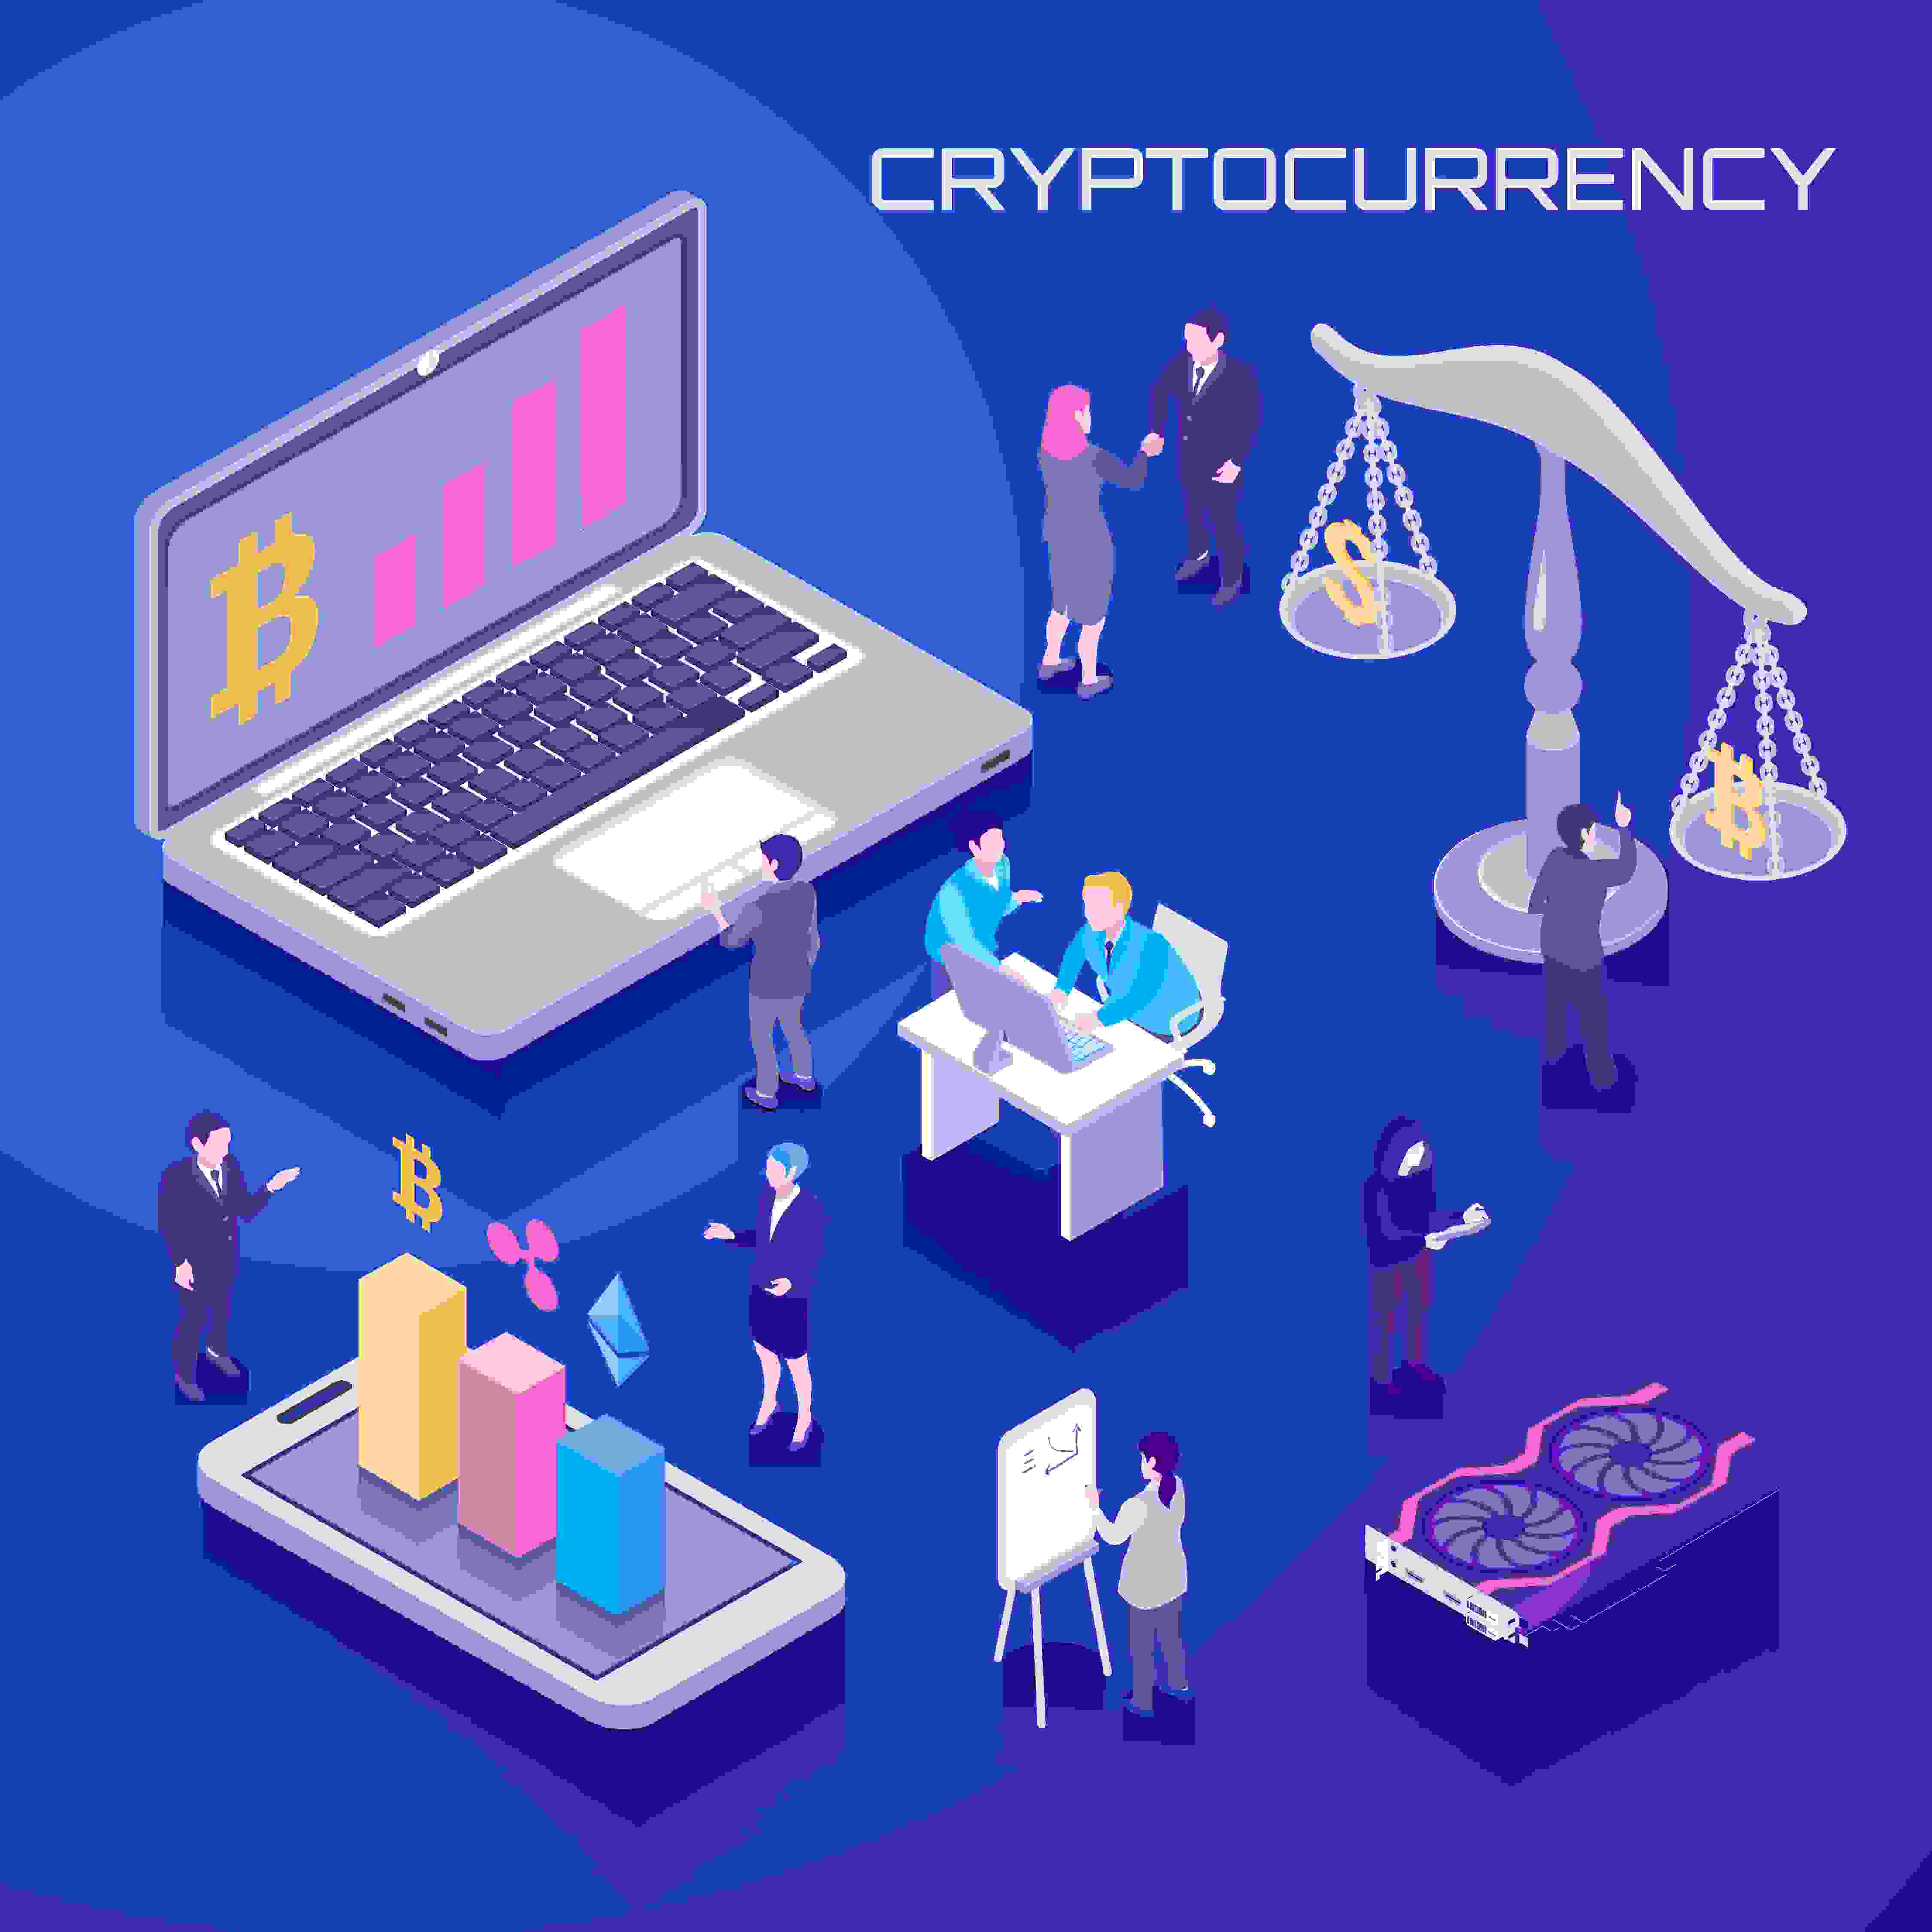 Benefits of cryptocurrency